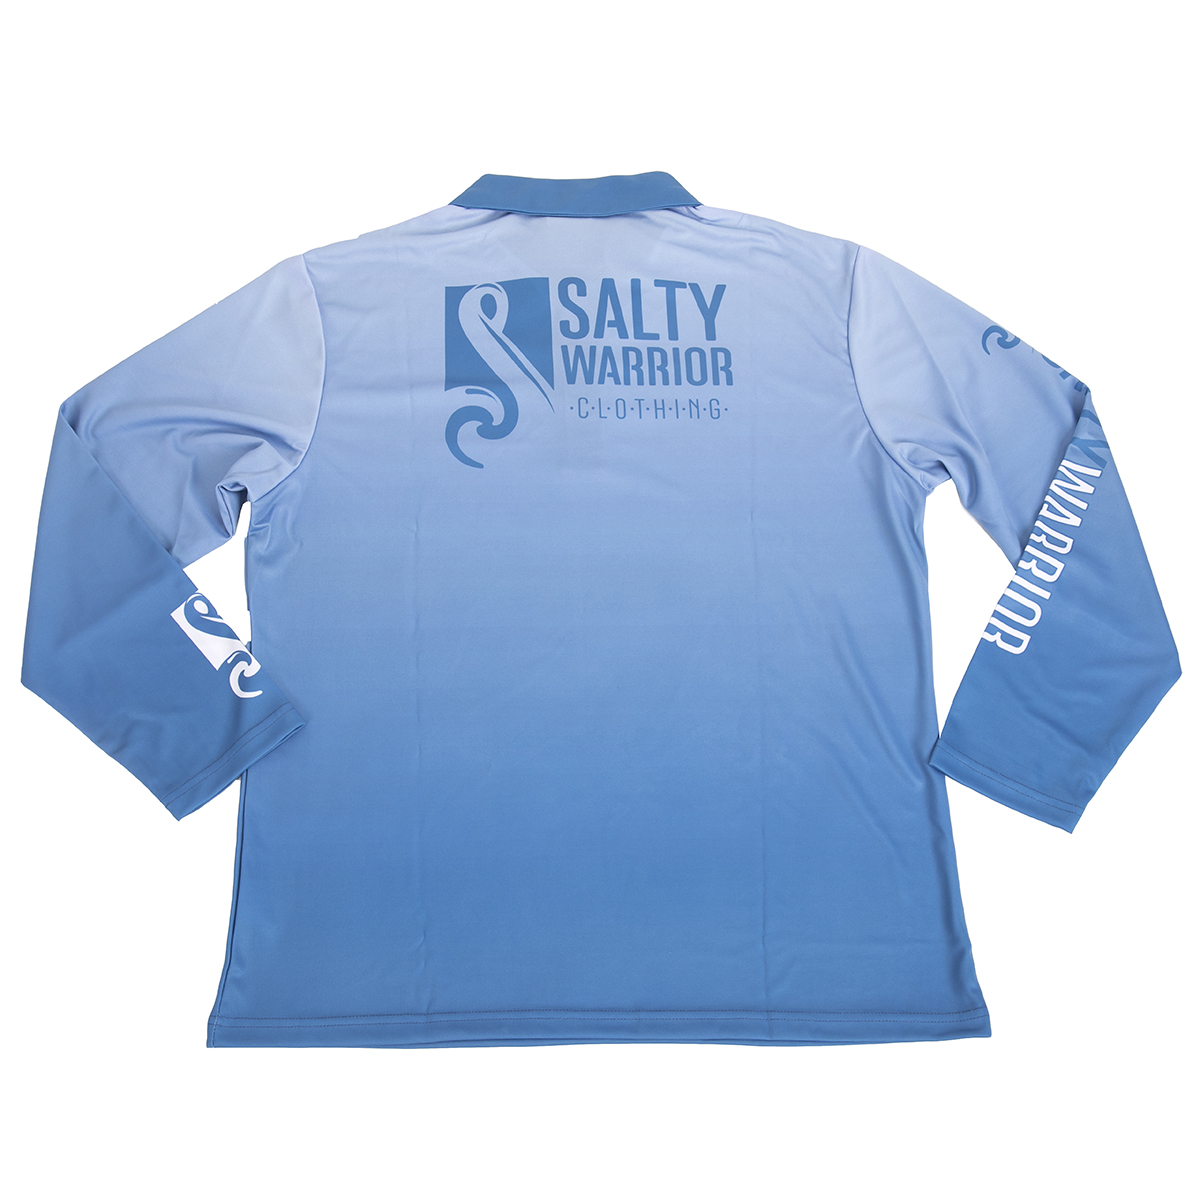 Plain Blue Shirt - Salty Warrior Clothing - Fishing apparel designed by ...